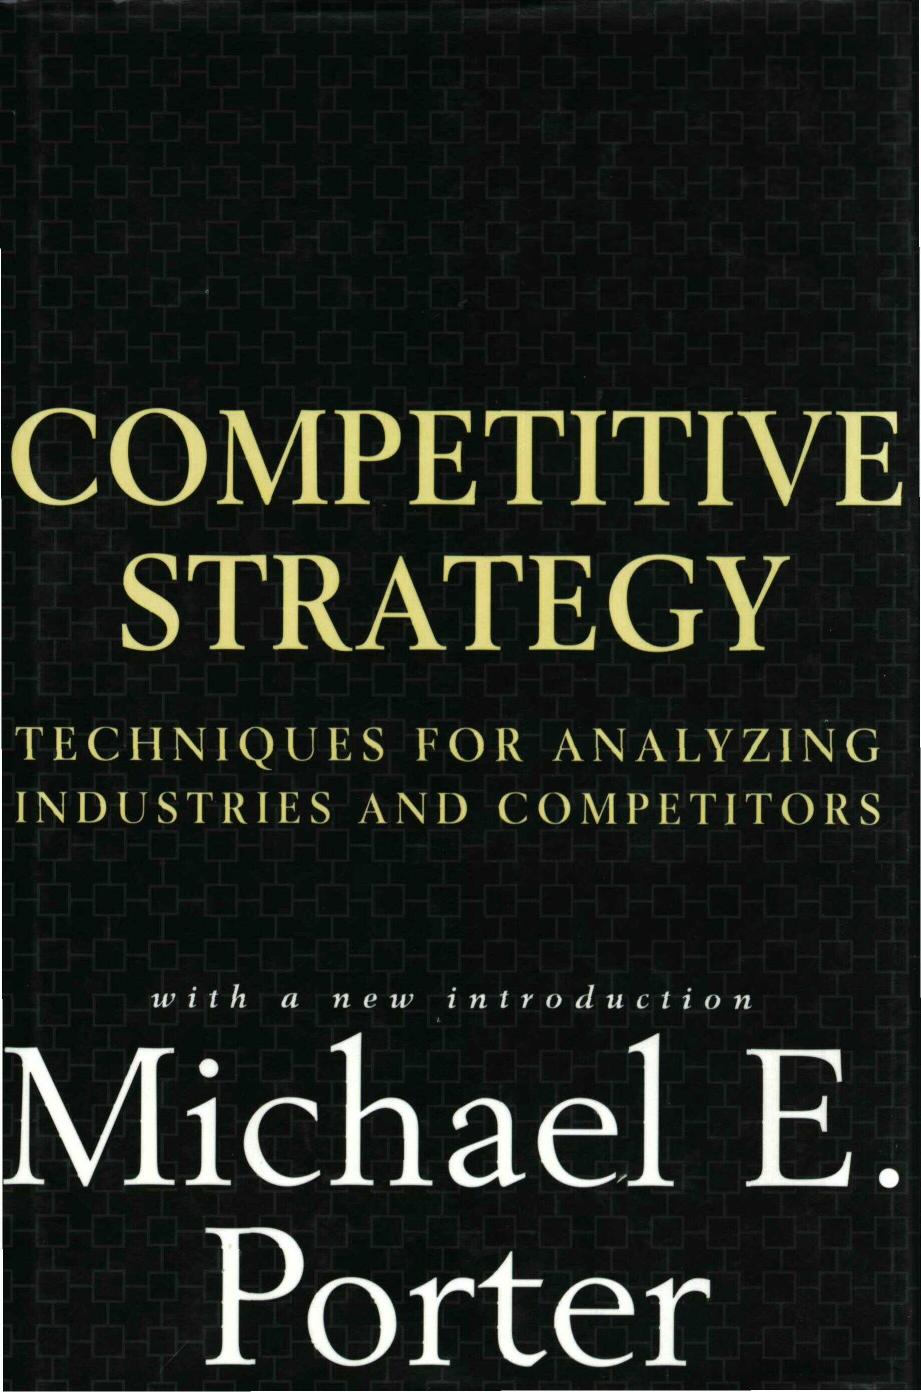 Michael E. Porter Competitive Strategy Techniques for Analyzing Industries and Competitors 1998